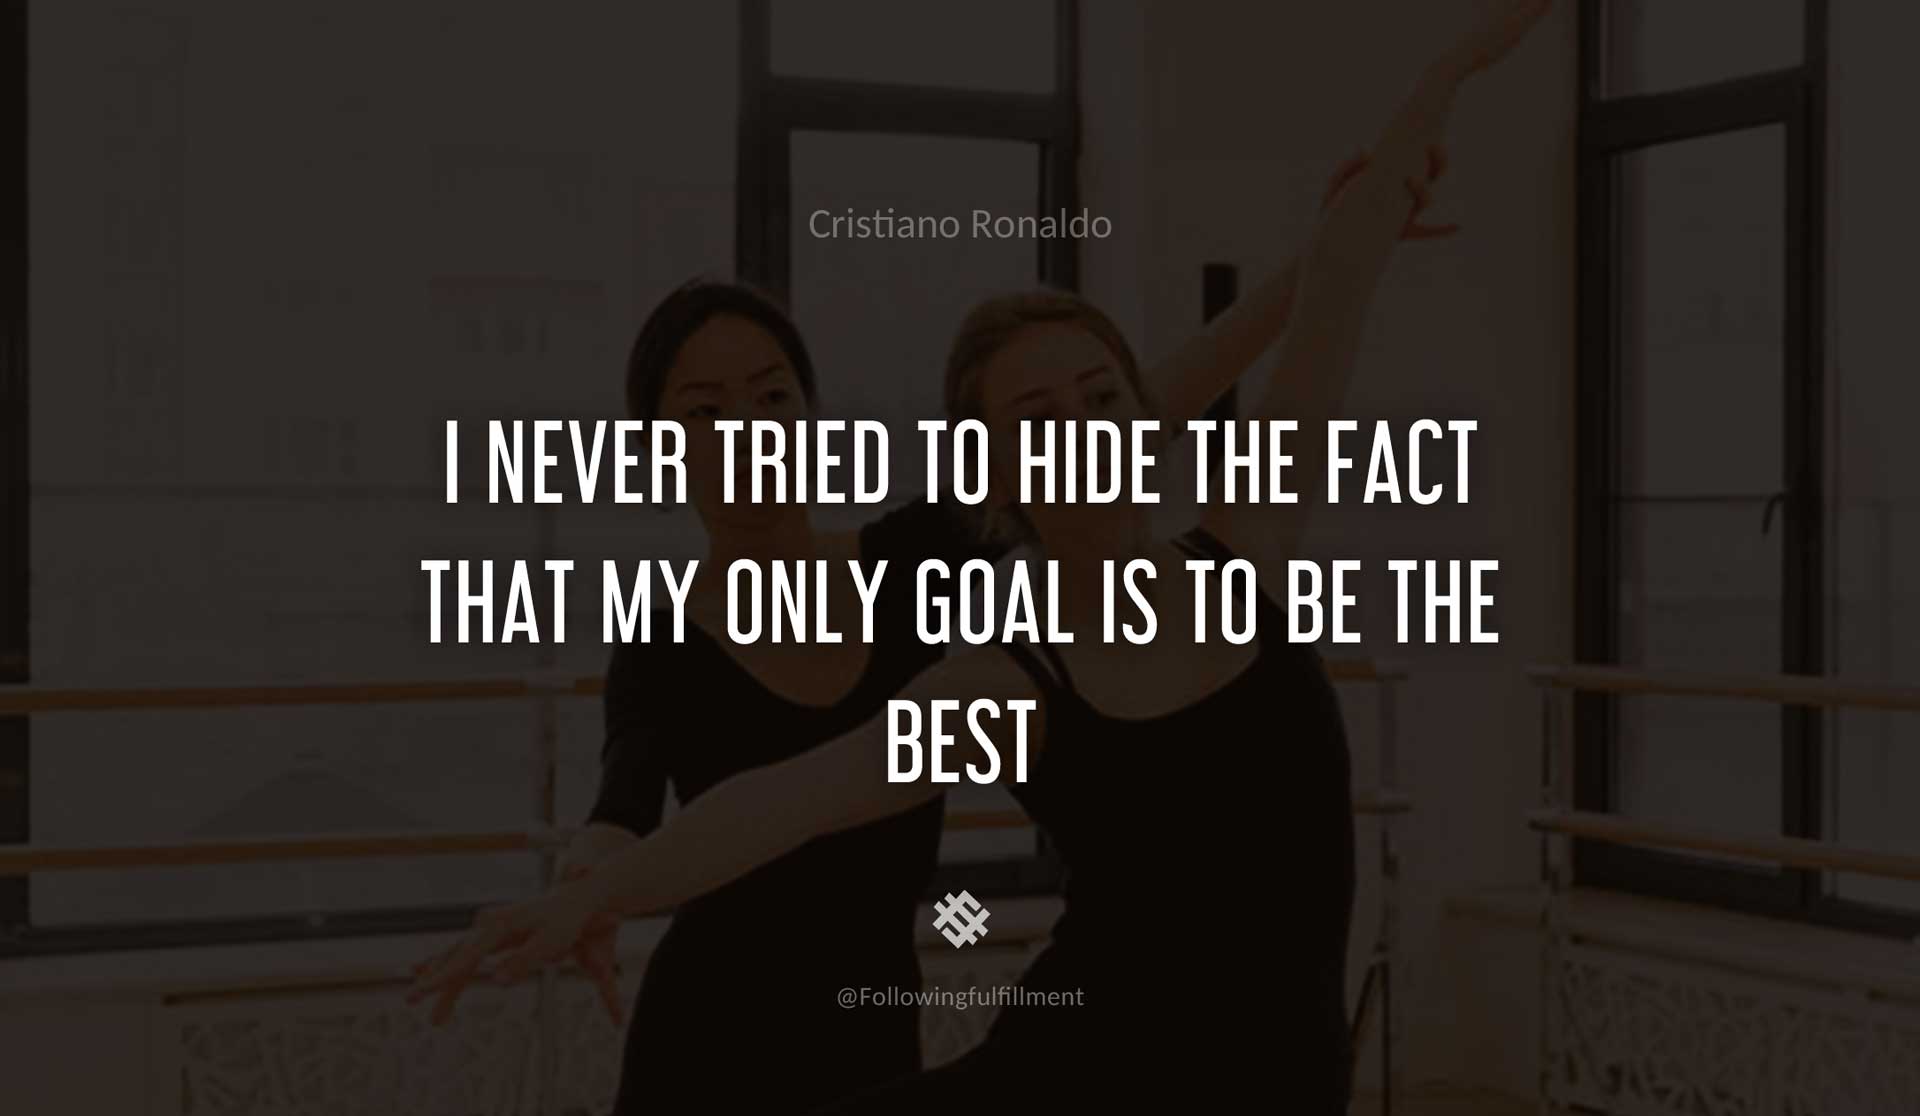 I-never-tried-to-hide-the-fact-that-my-only-goal-is-to-be-the-best-CRISTIANO-RONALDO-Quote.jpg